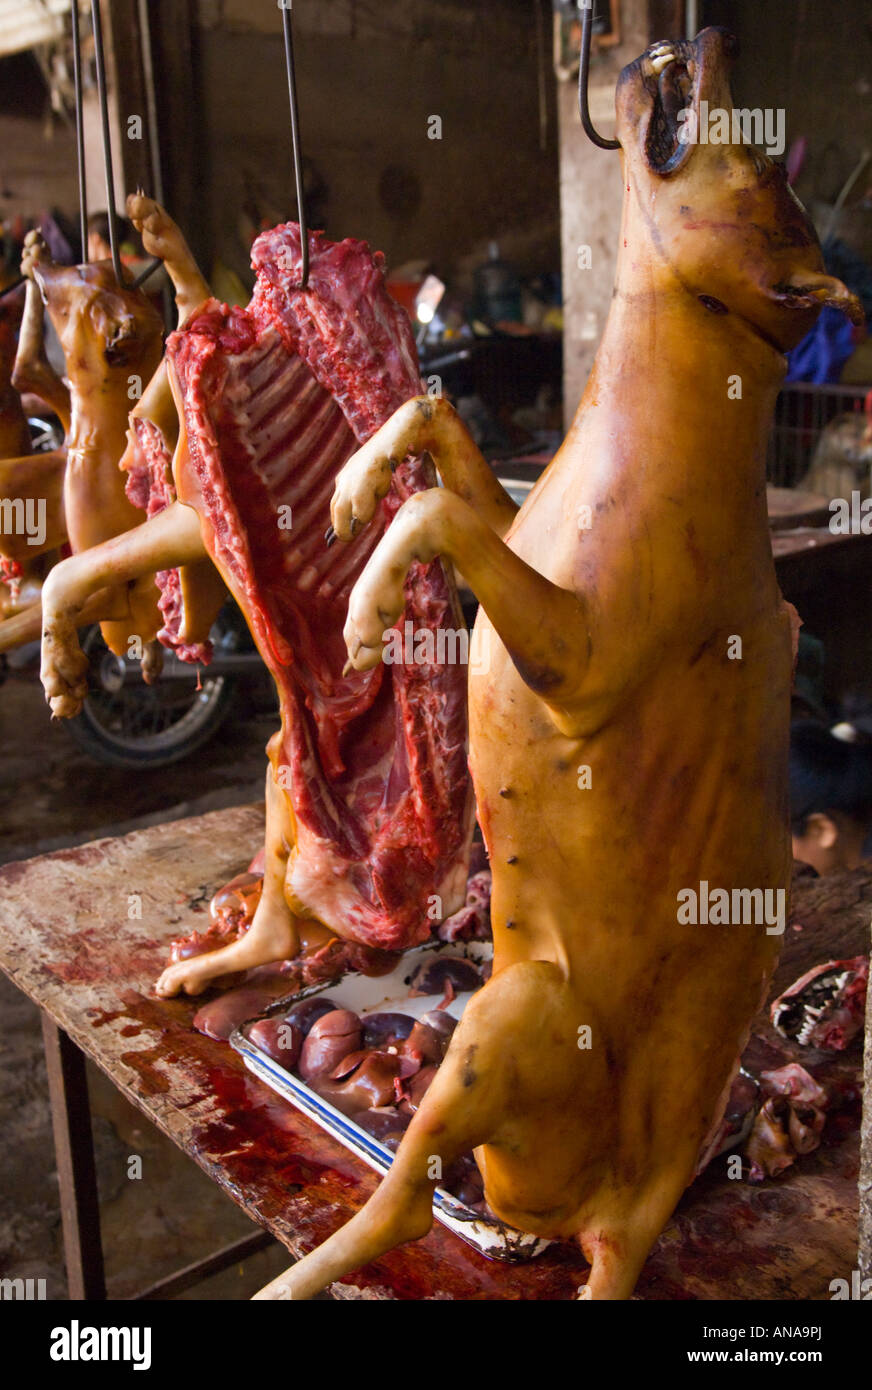 China Guangxi Yuangshuo local food market dog meat for sale hanging cooked dogs Stock Photo